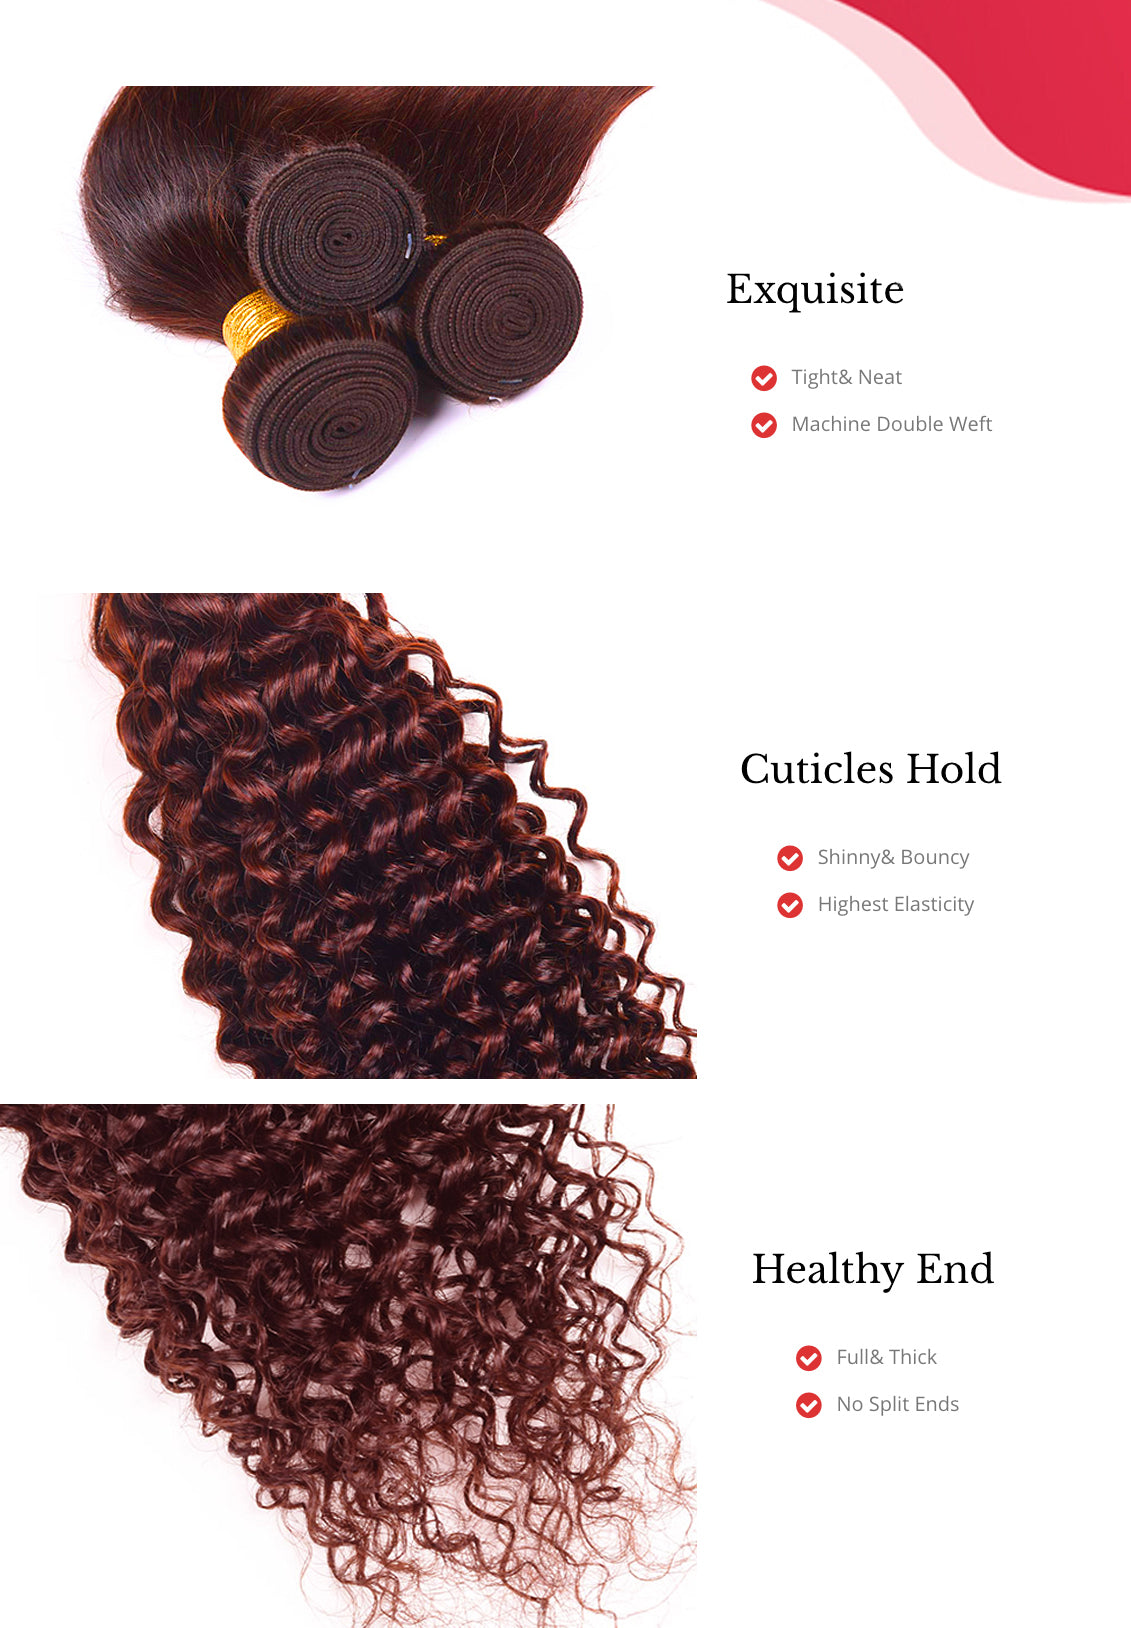 MarchQueen Peruvian Curly Weave Human Hair 3 Bundles Color Weave Cheap Remy Hair Extensions 7 Colors